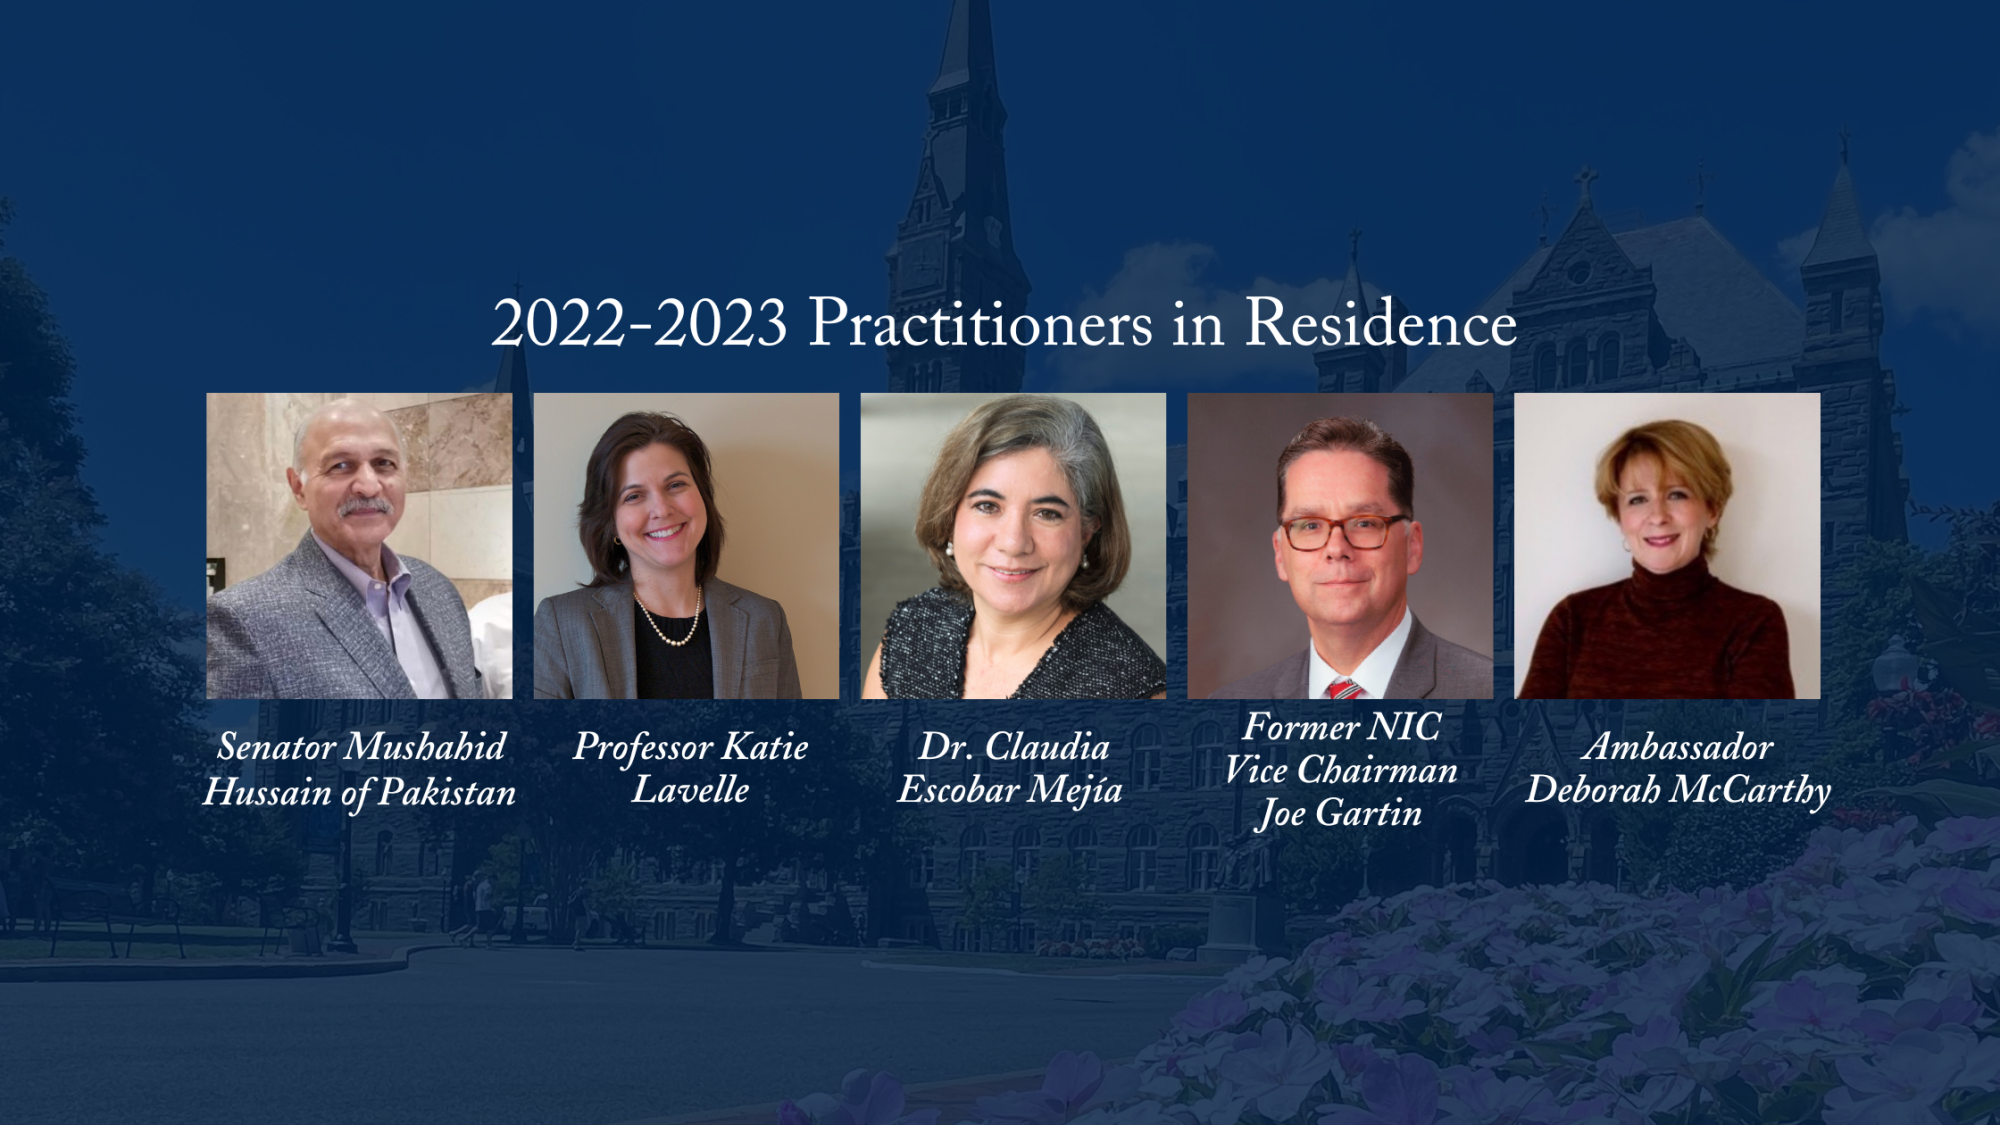 Graphic featuring the photos of the five Practitioners with Healy Hall in the background